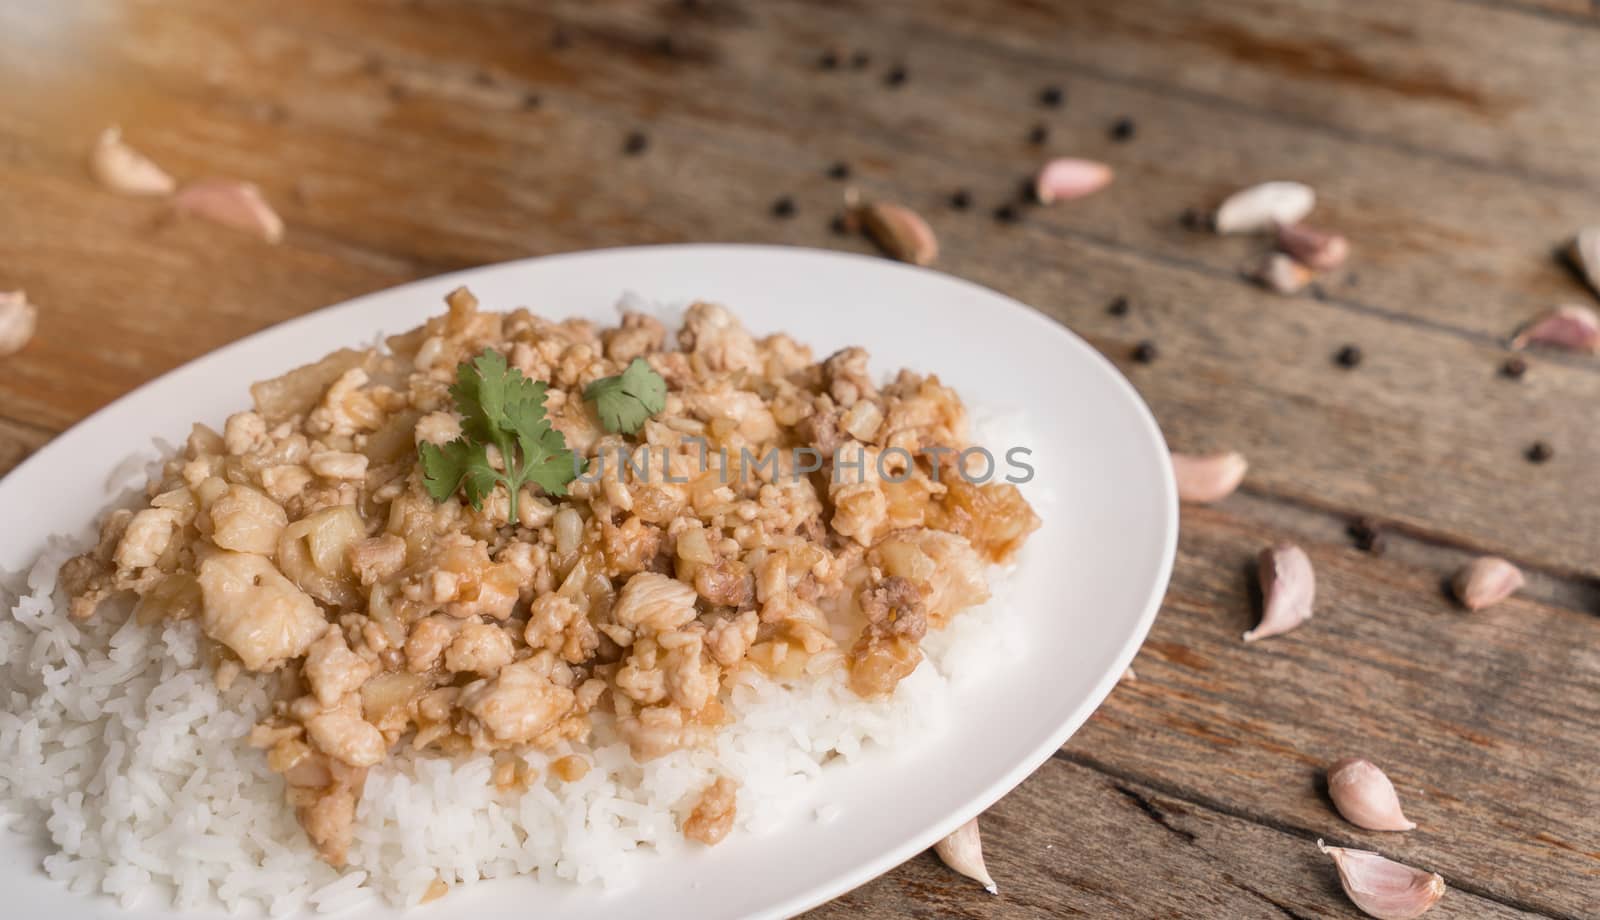 Fried Chicken with Garlic on Rice.  Thai food concept by Buttus_casso